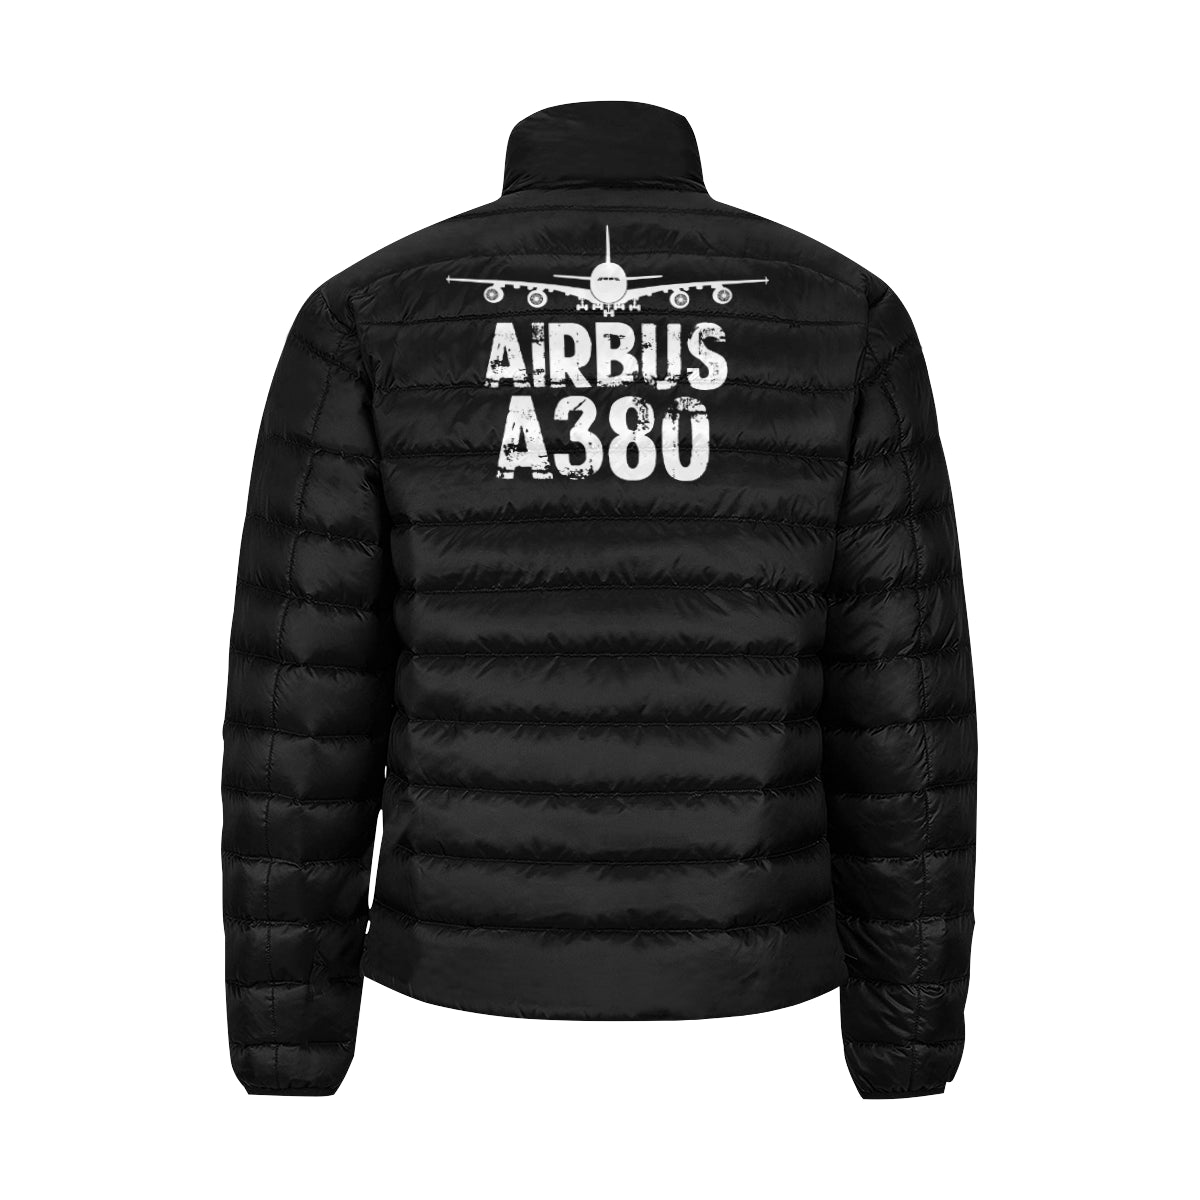 Airbus A380 Men's Stand Collar Padded Jacket e-joyer